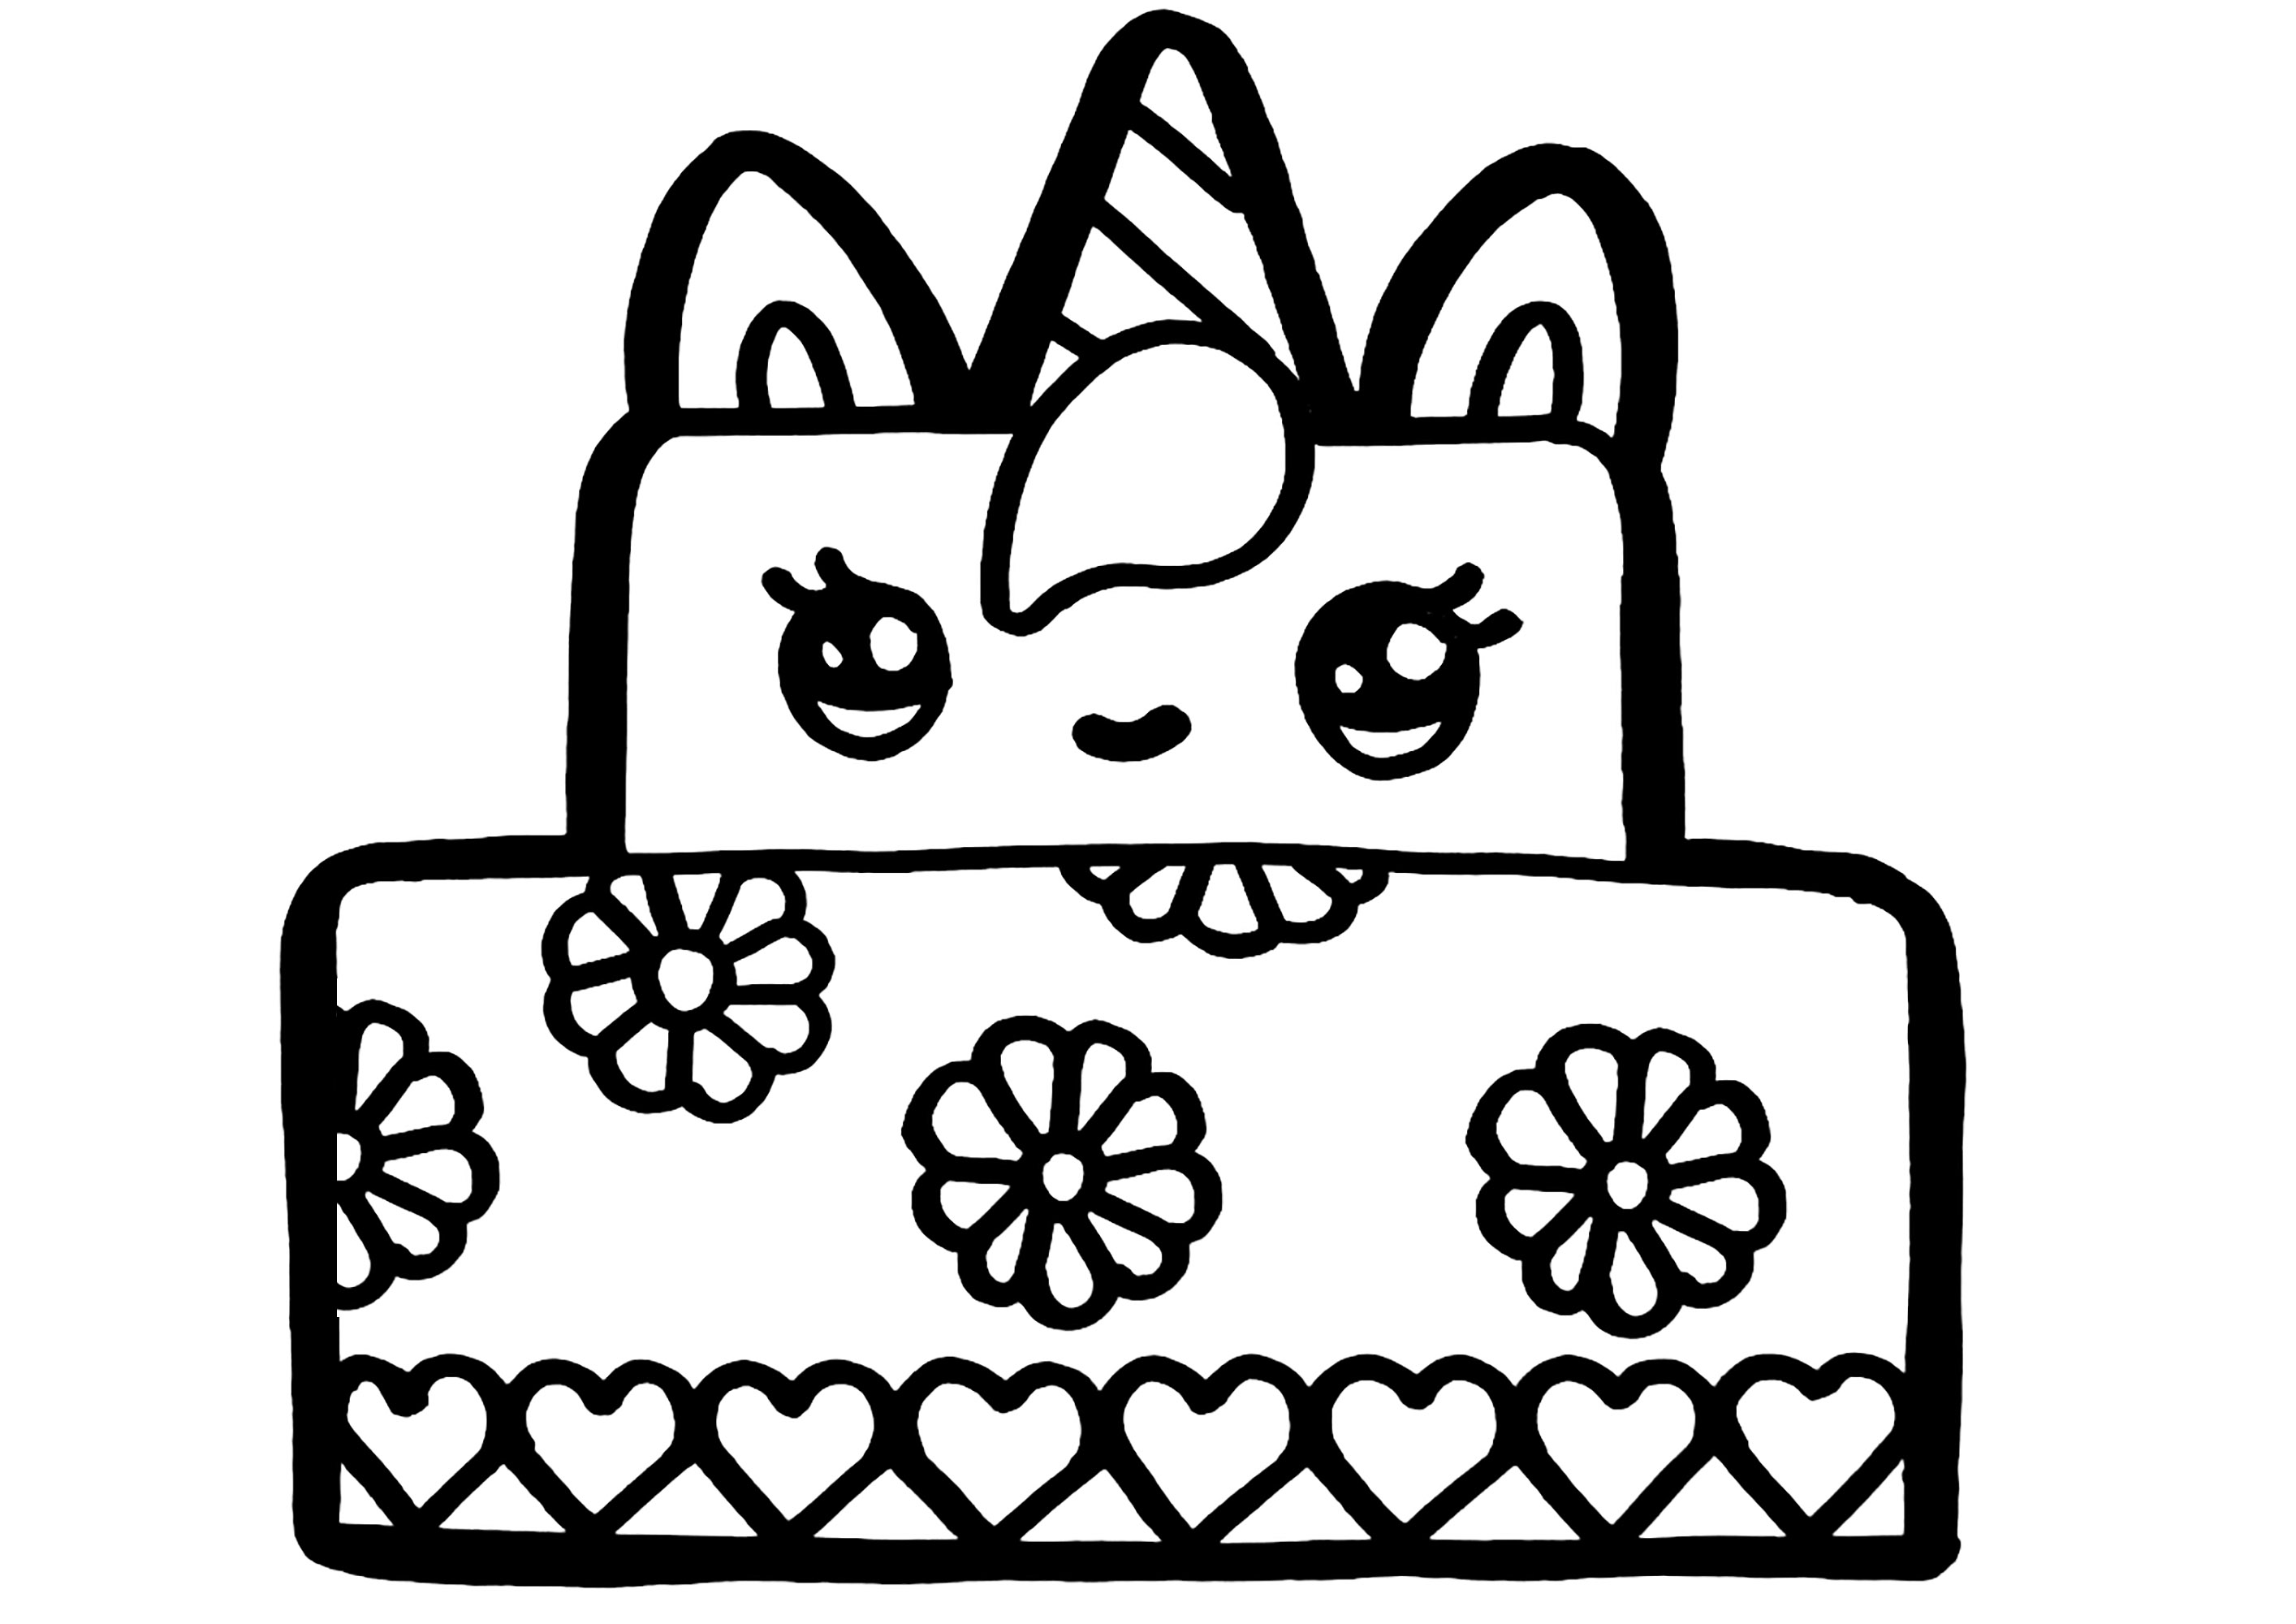 Pretty unicorn cake. Color these pretty hearts and flowers on the cake